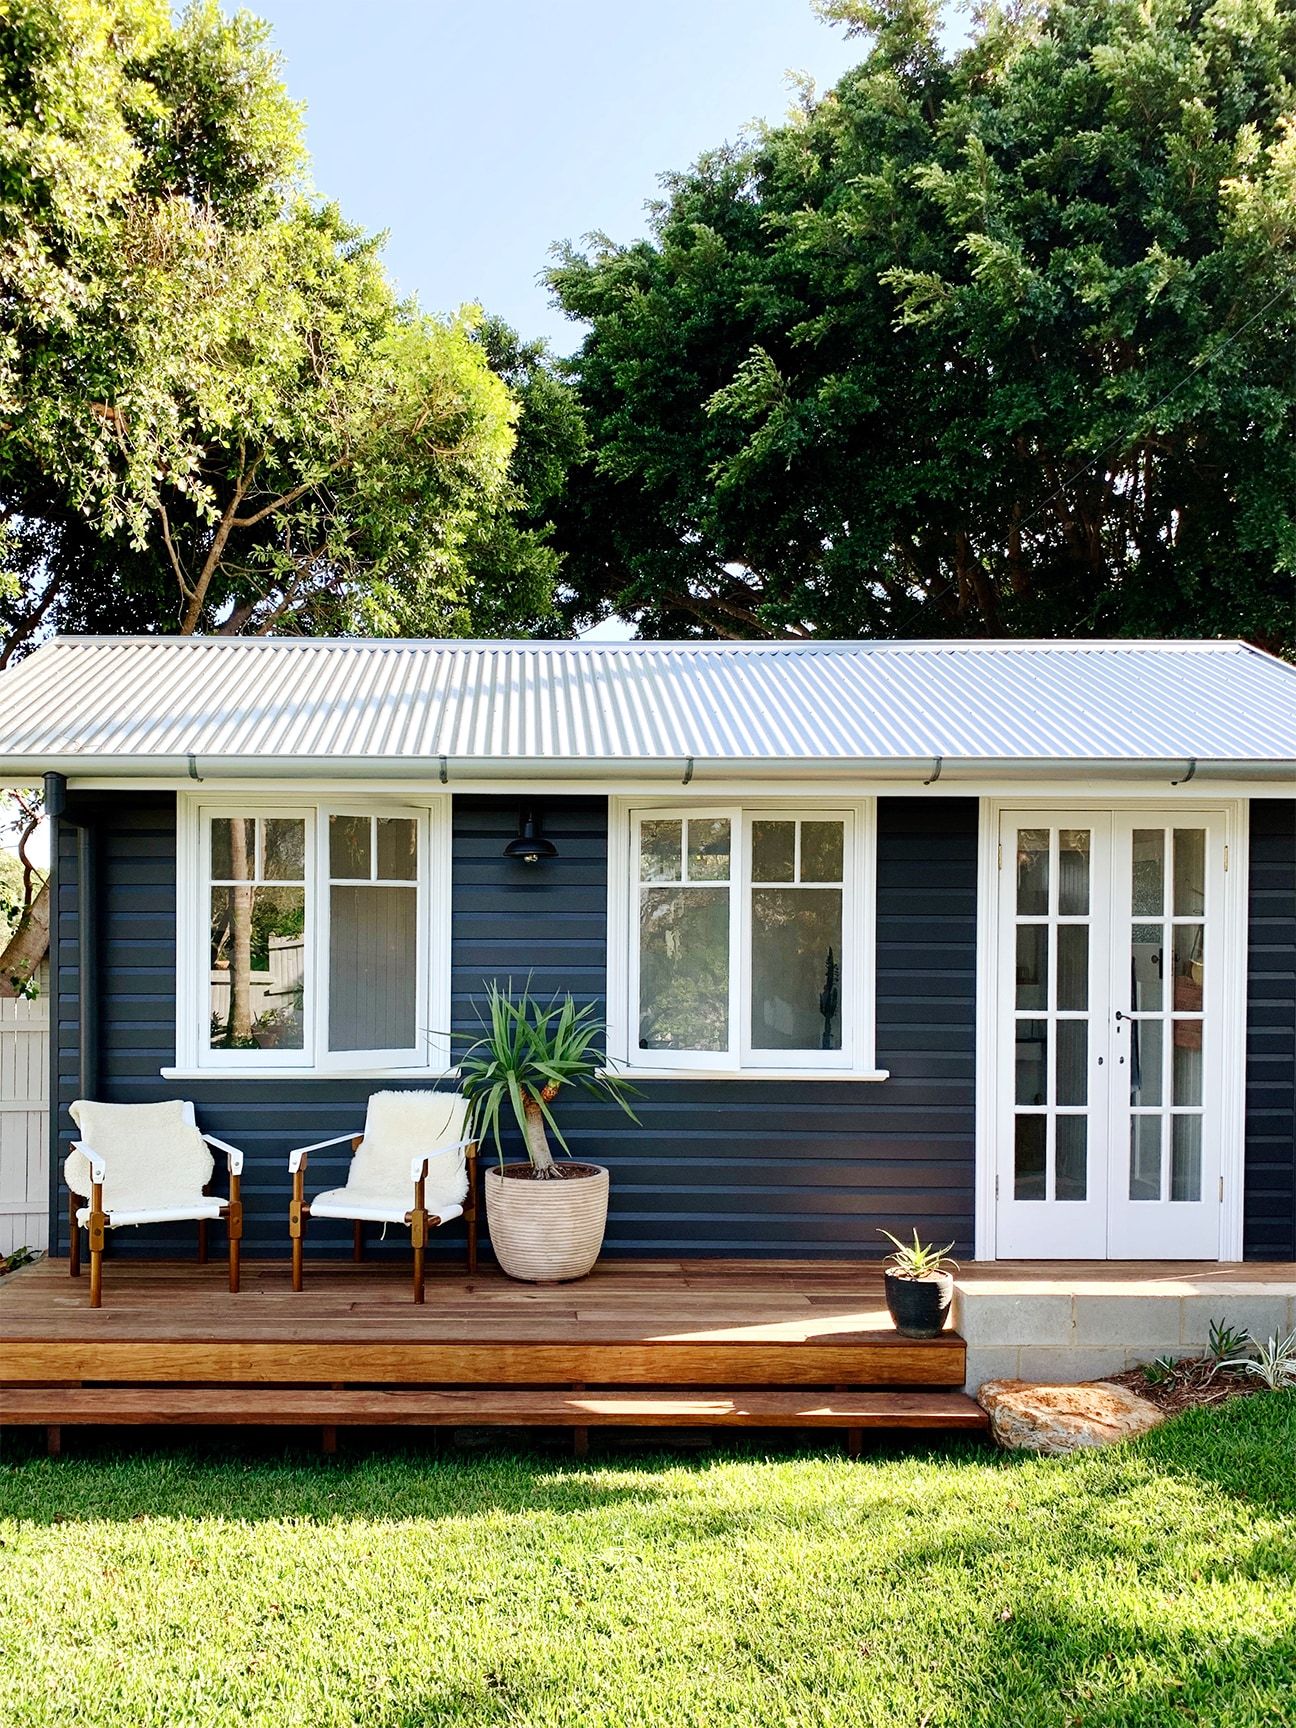 A Guide to Compact Garden Houses: How to Make the Most of Limited Space